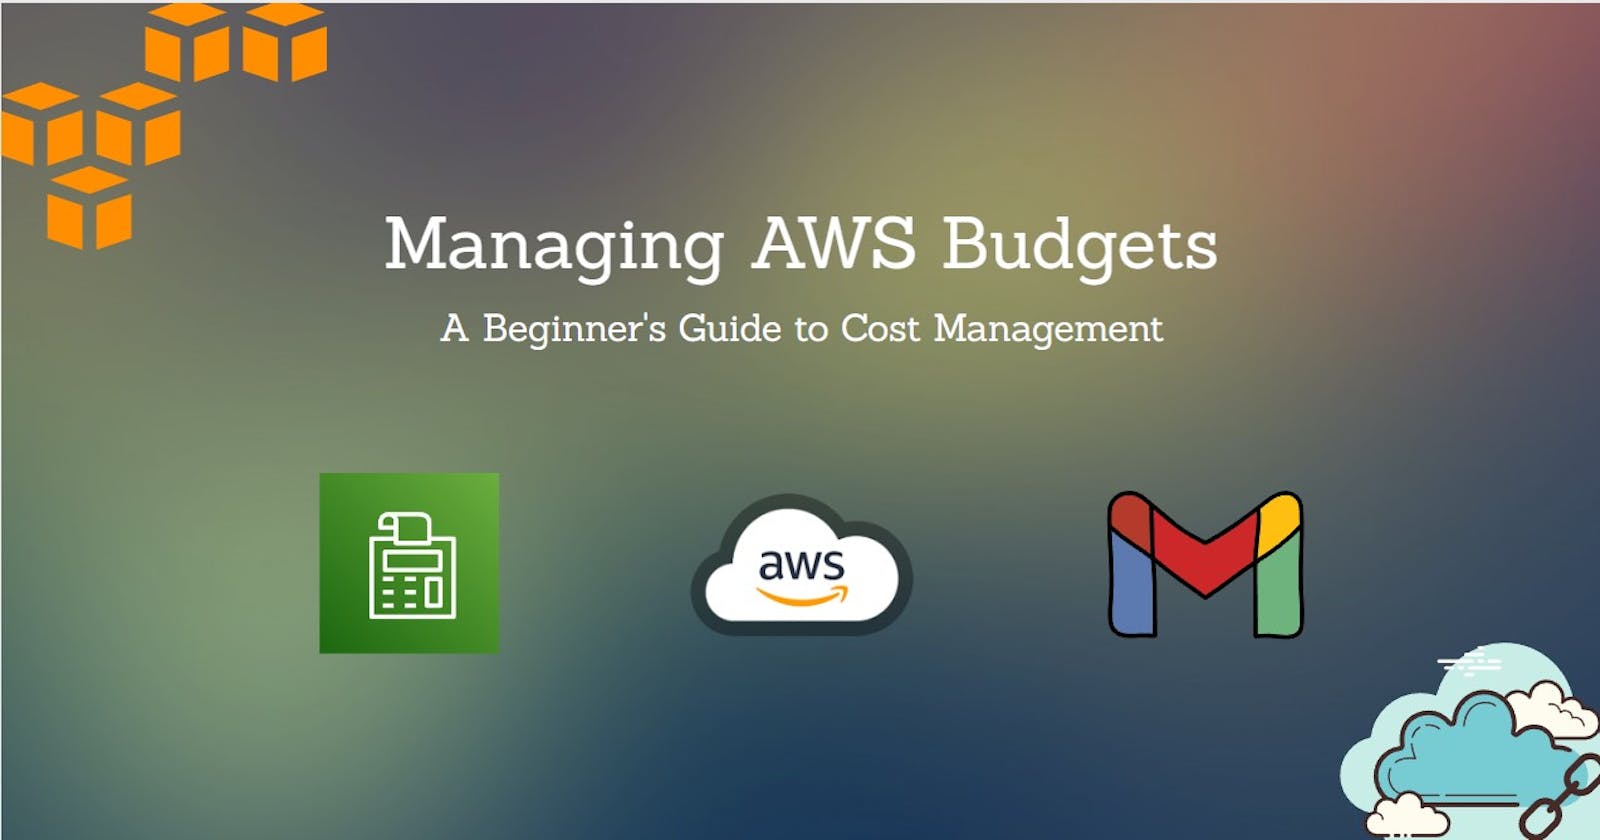 Setting Up Budget Alarms to Prevent Overspending for AWS Usage